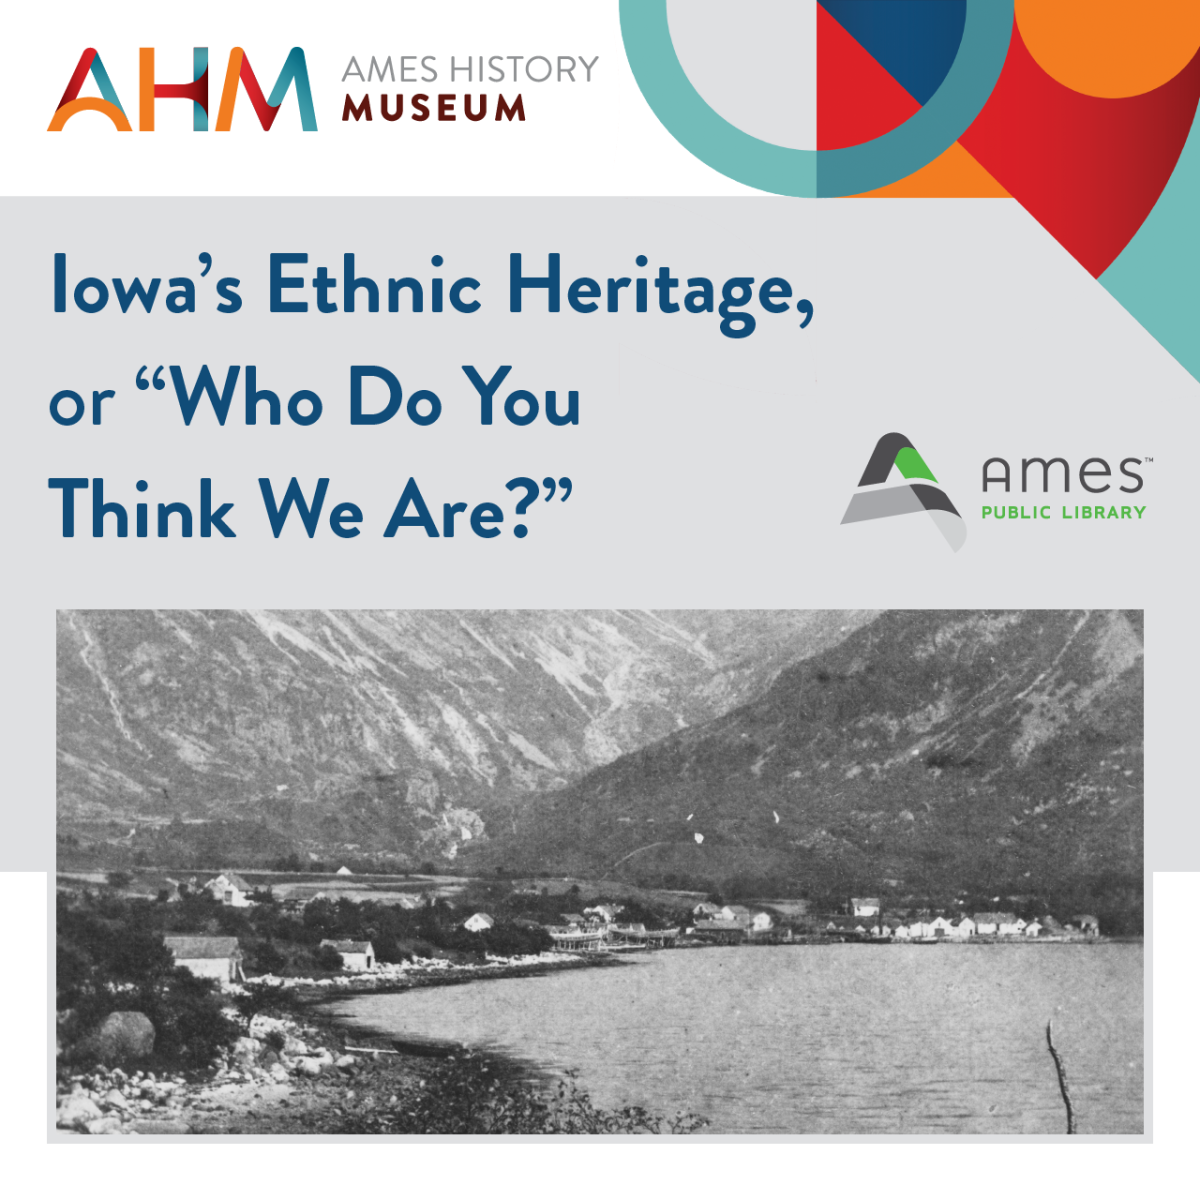 Ames History Museum - Iowa's Ethnic Heritage, or "Who Do You Think We Are?"